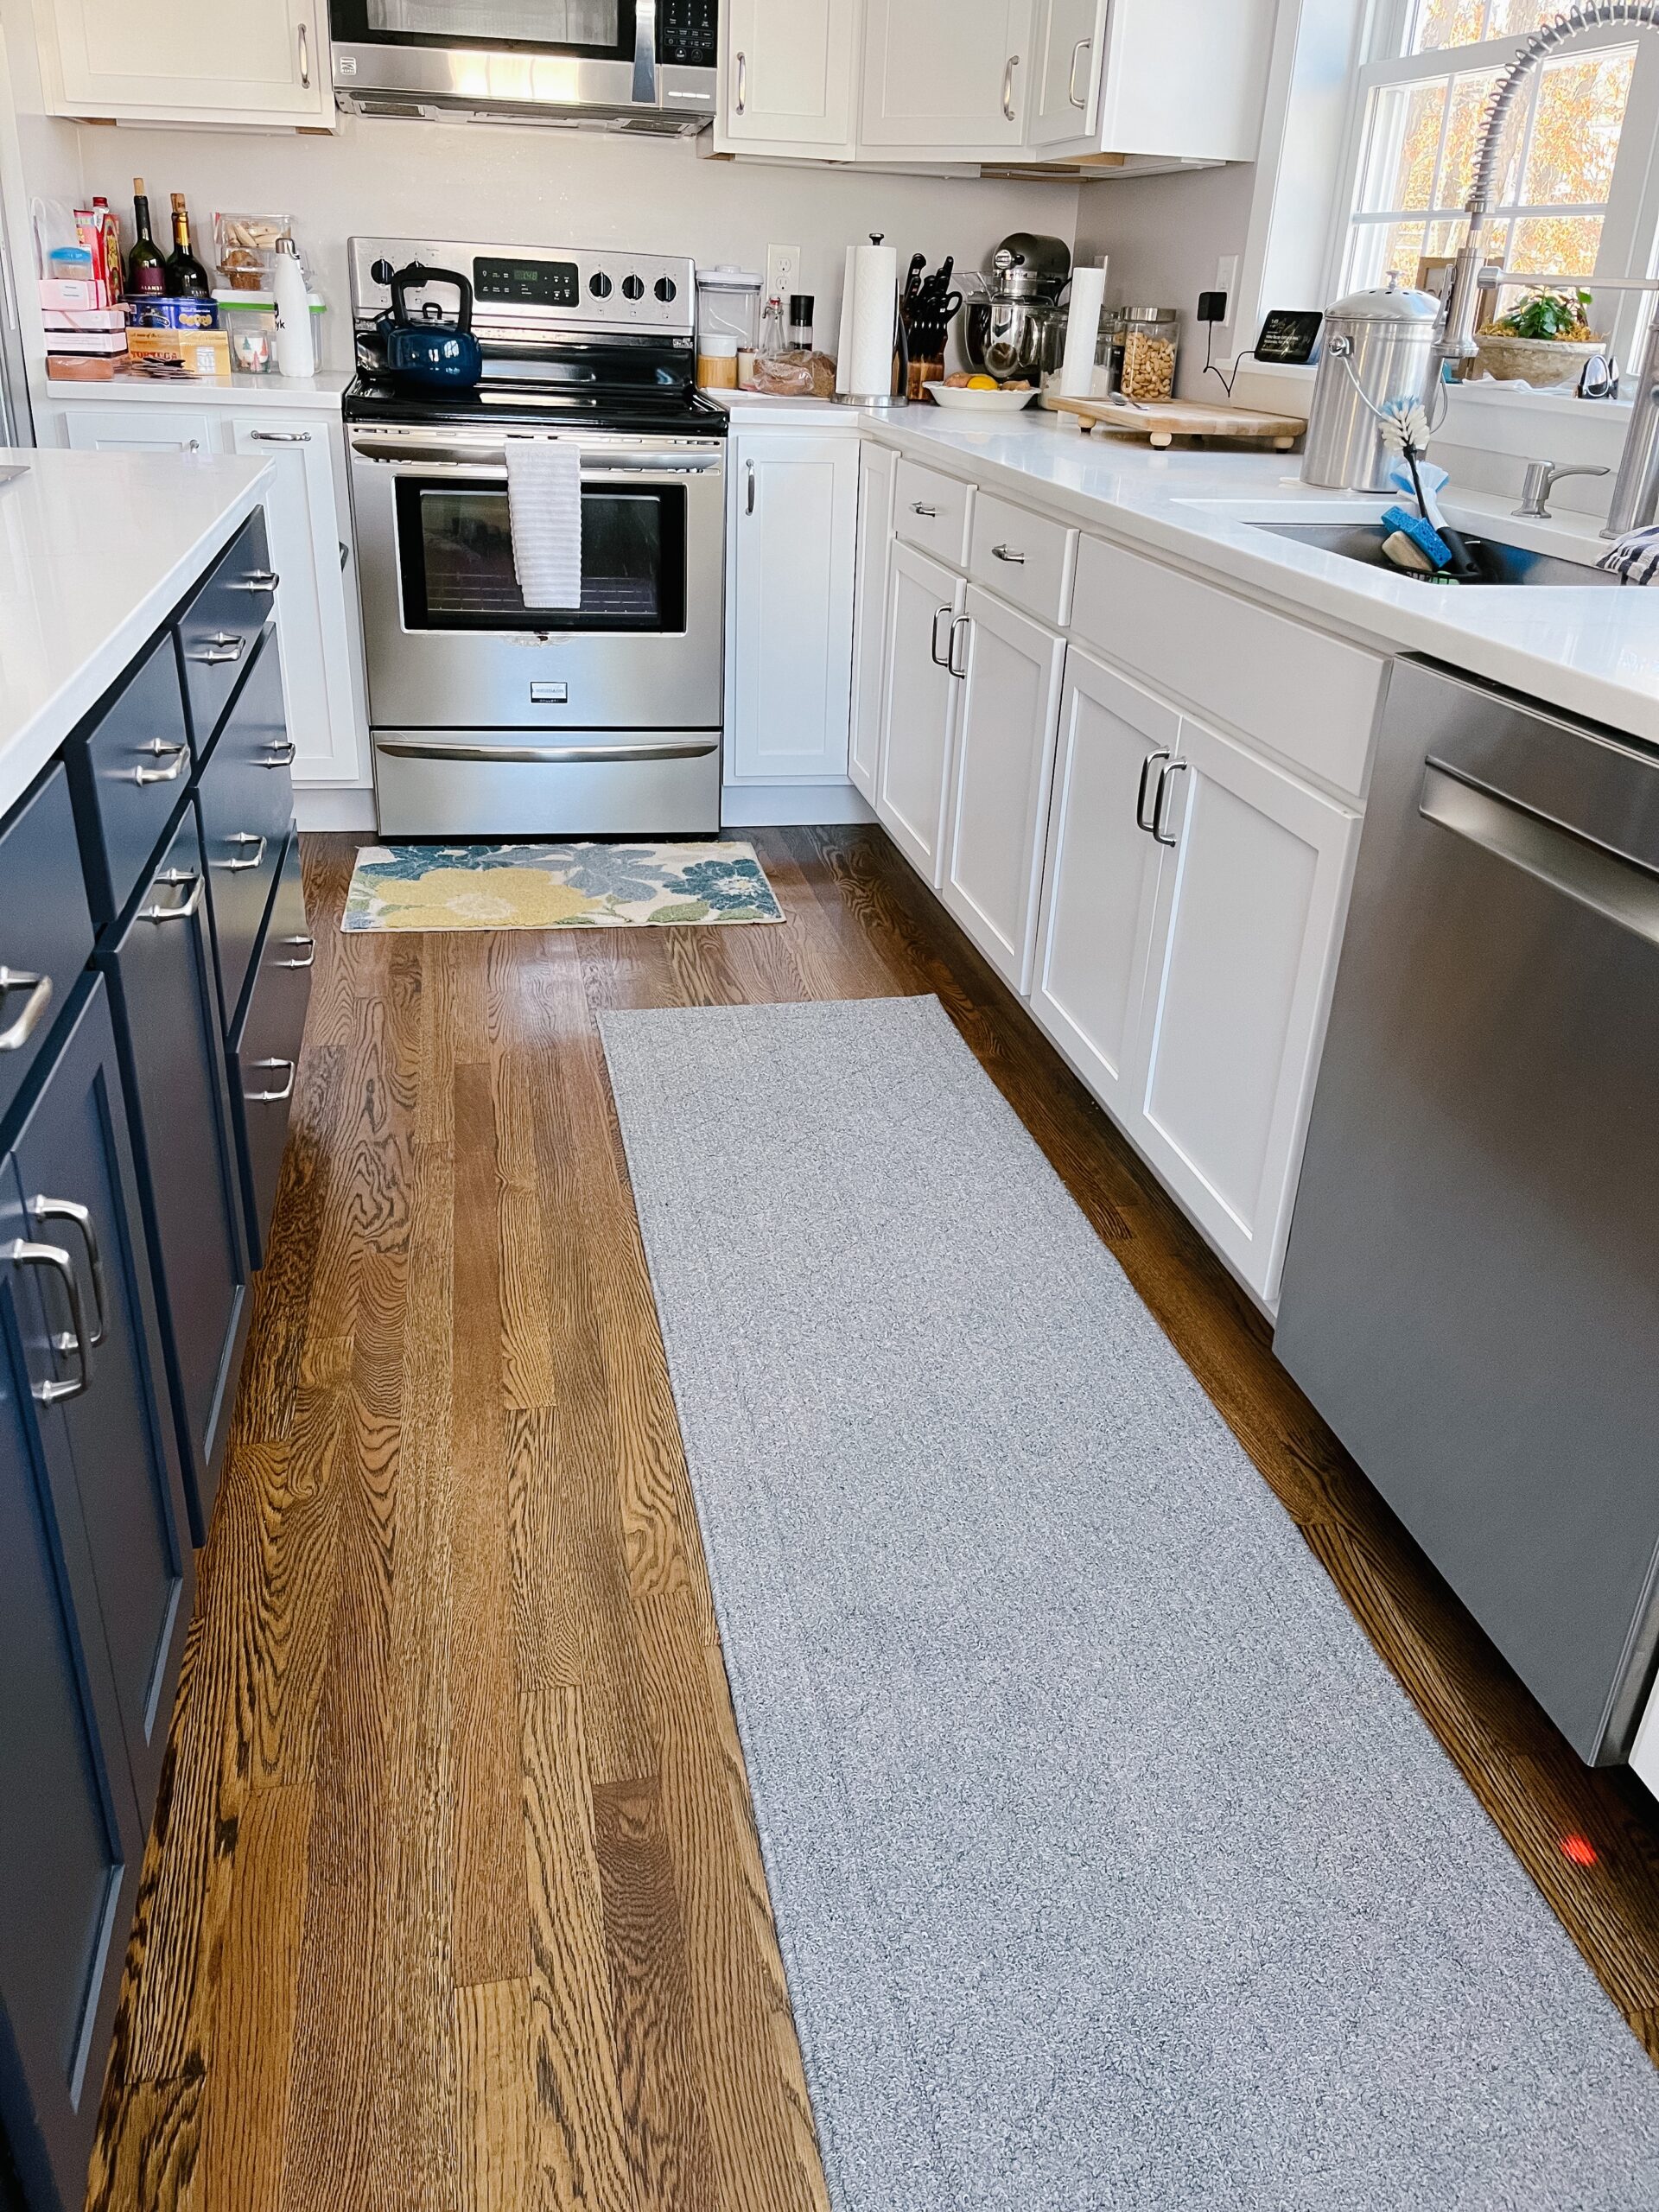 Affordable Washable Kitchen Rugs are a Must - M Loves M